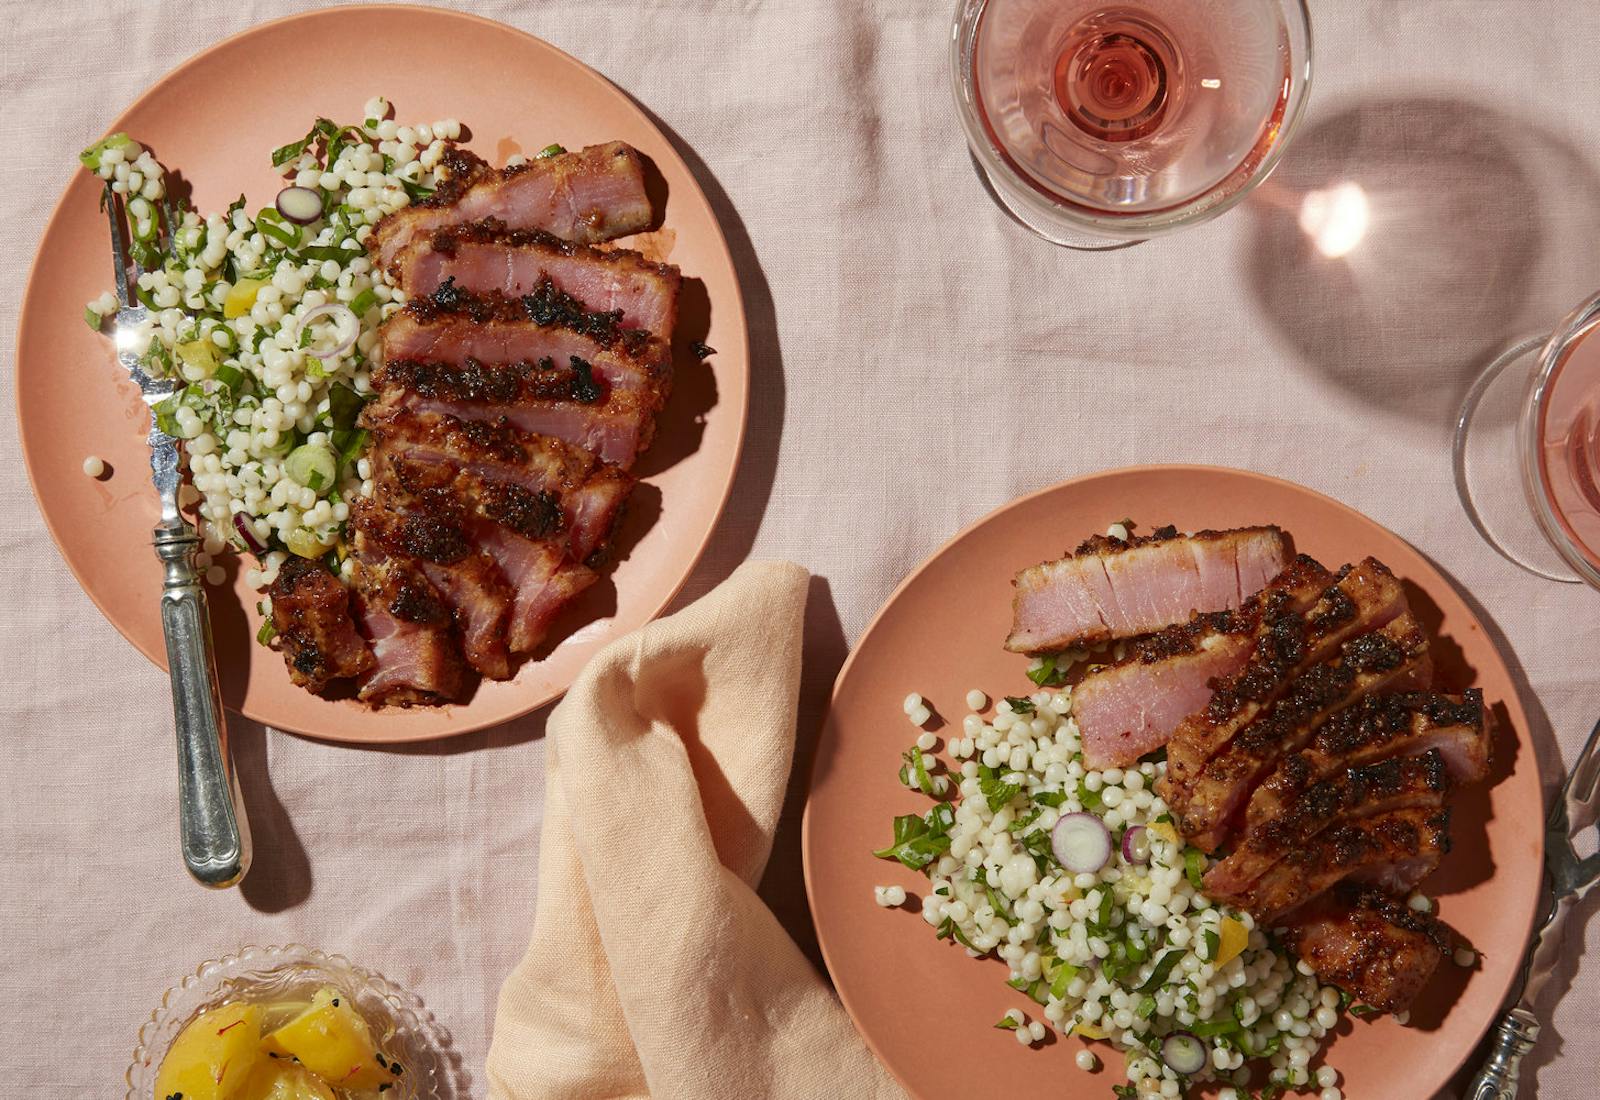 Salmon colored plates with sliced tuna pastrami and couscous salad alongside glasses of rosé, atop pink tablecloth.